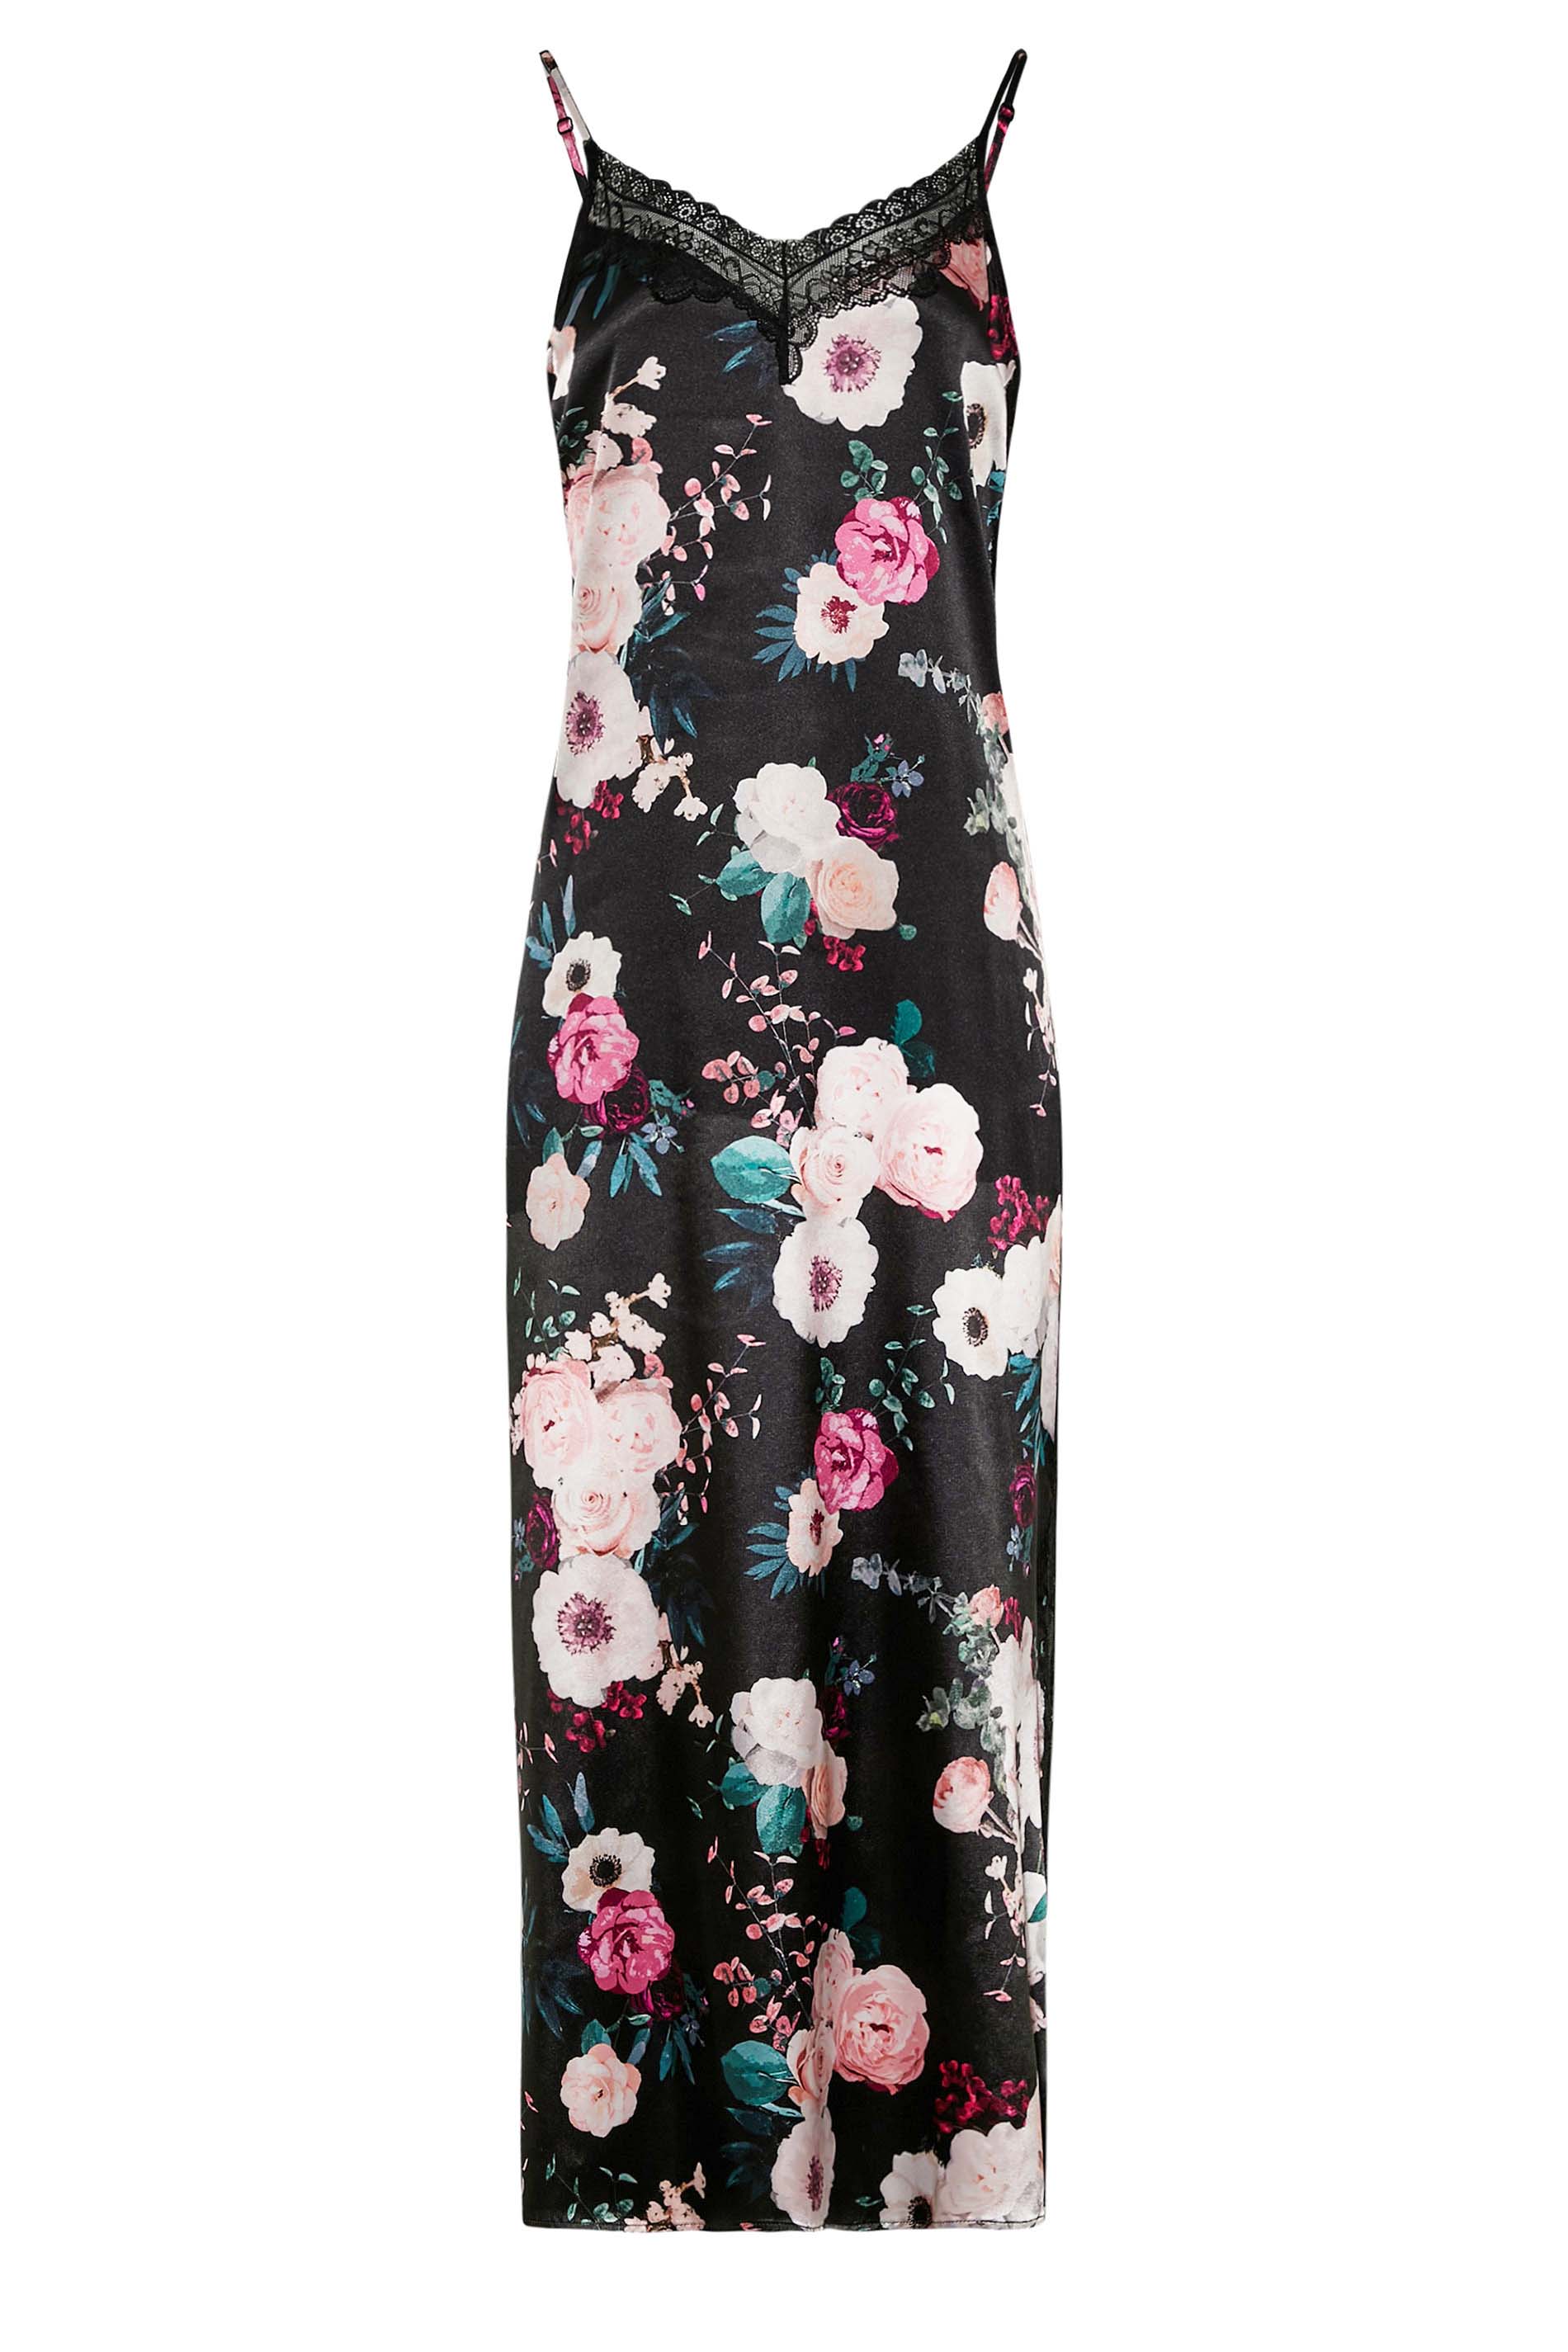 LTS Tall Women's Black Floral Satin Chemise | Long Tall Sally